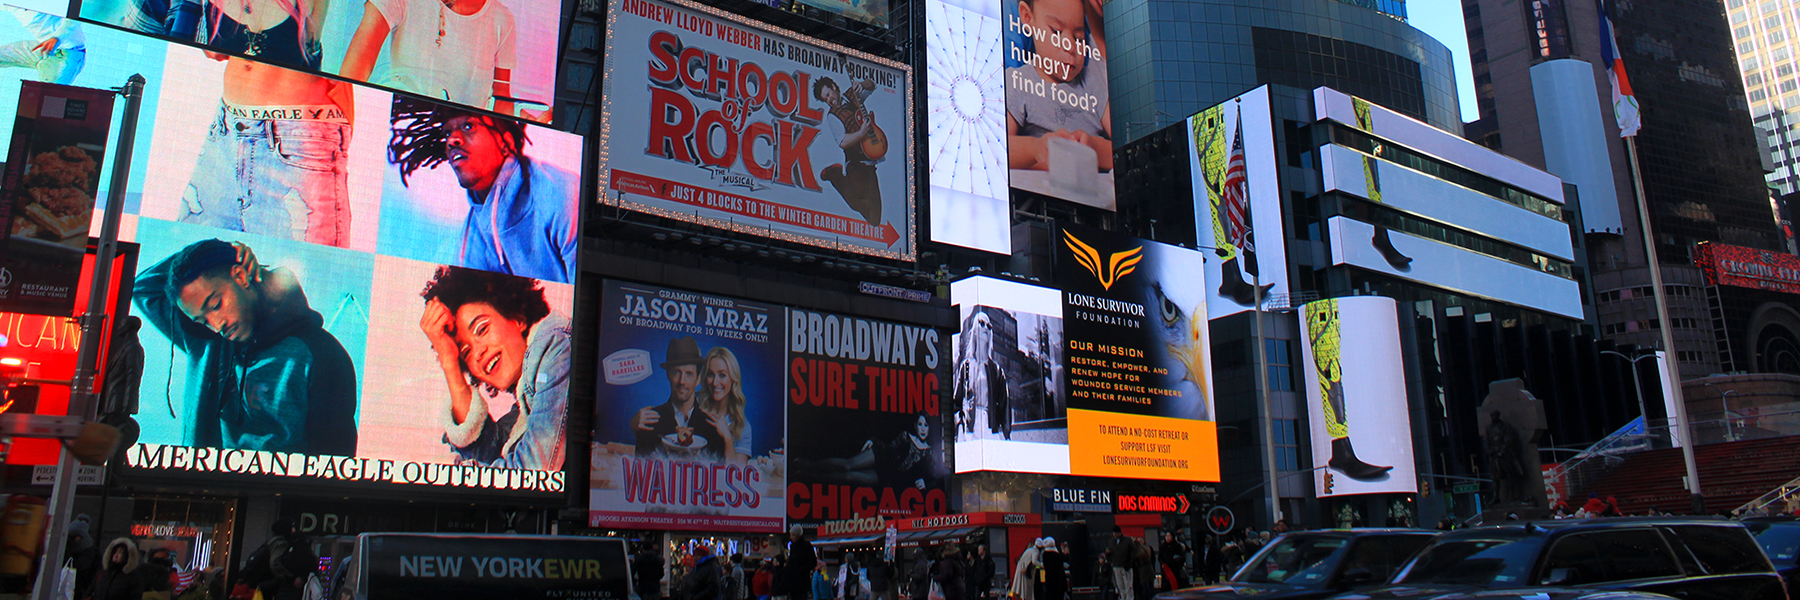 Billboards along the street in New York City